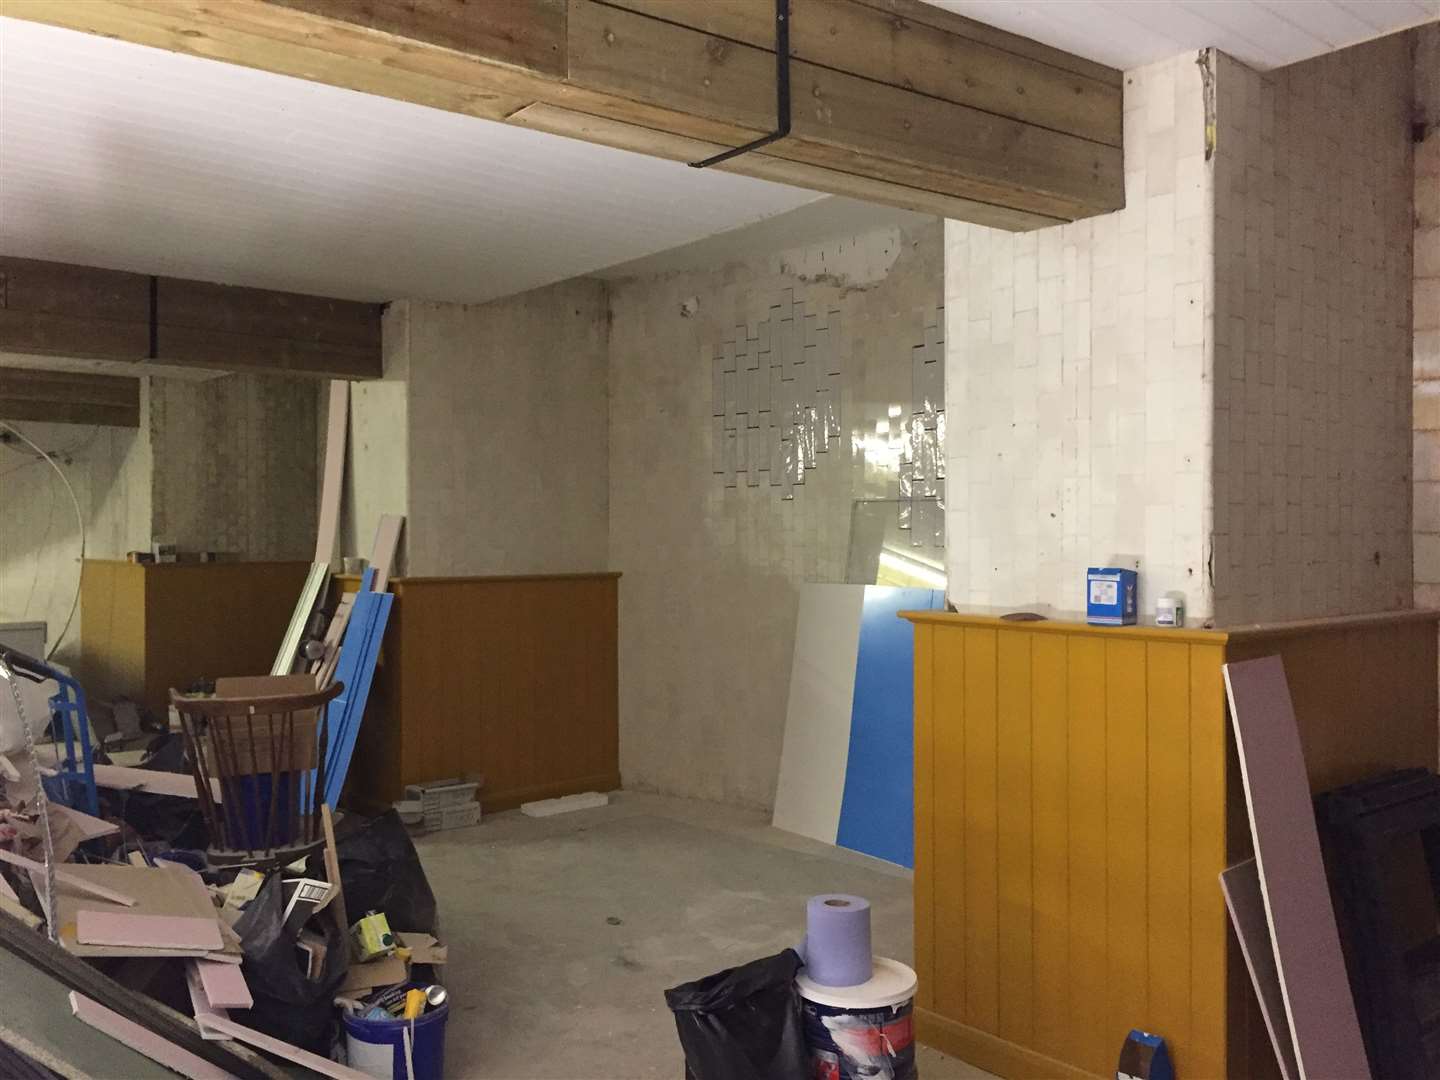 The basement is currently being transformed for the new food hall